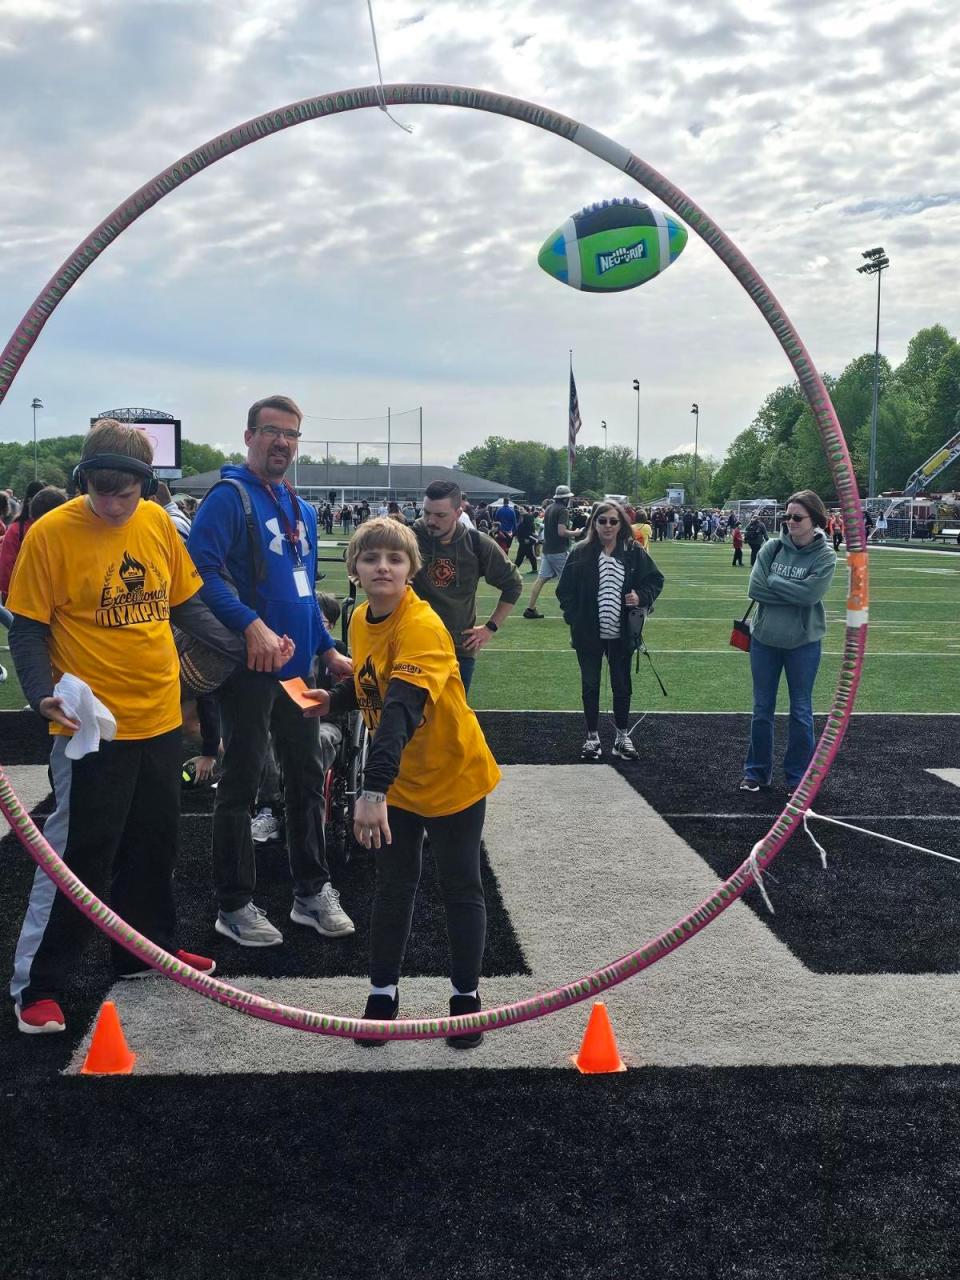 Aleria DiGrangia with the Stark County Learning Center tosses a football through a target Friday during the 37th annual Exceptional Olympics at Wakefield Stadium at Perry High School.